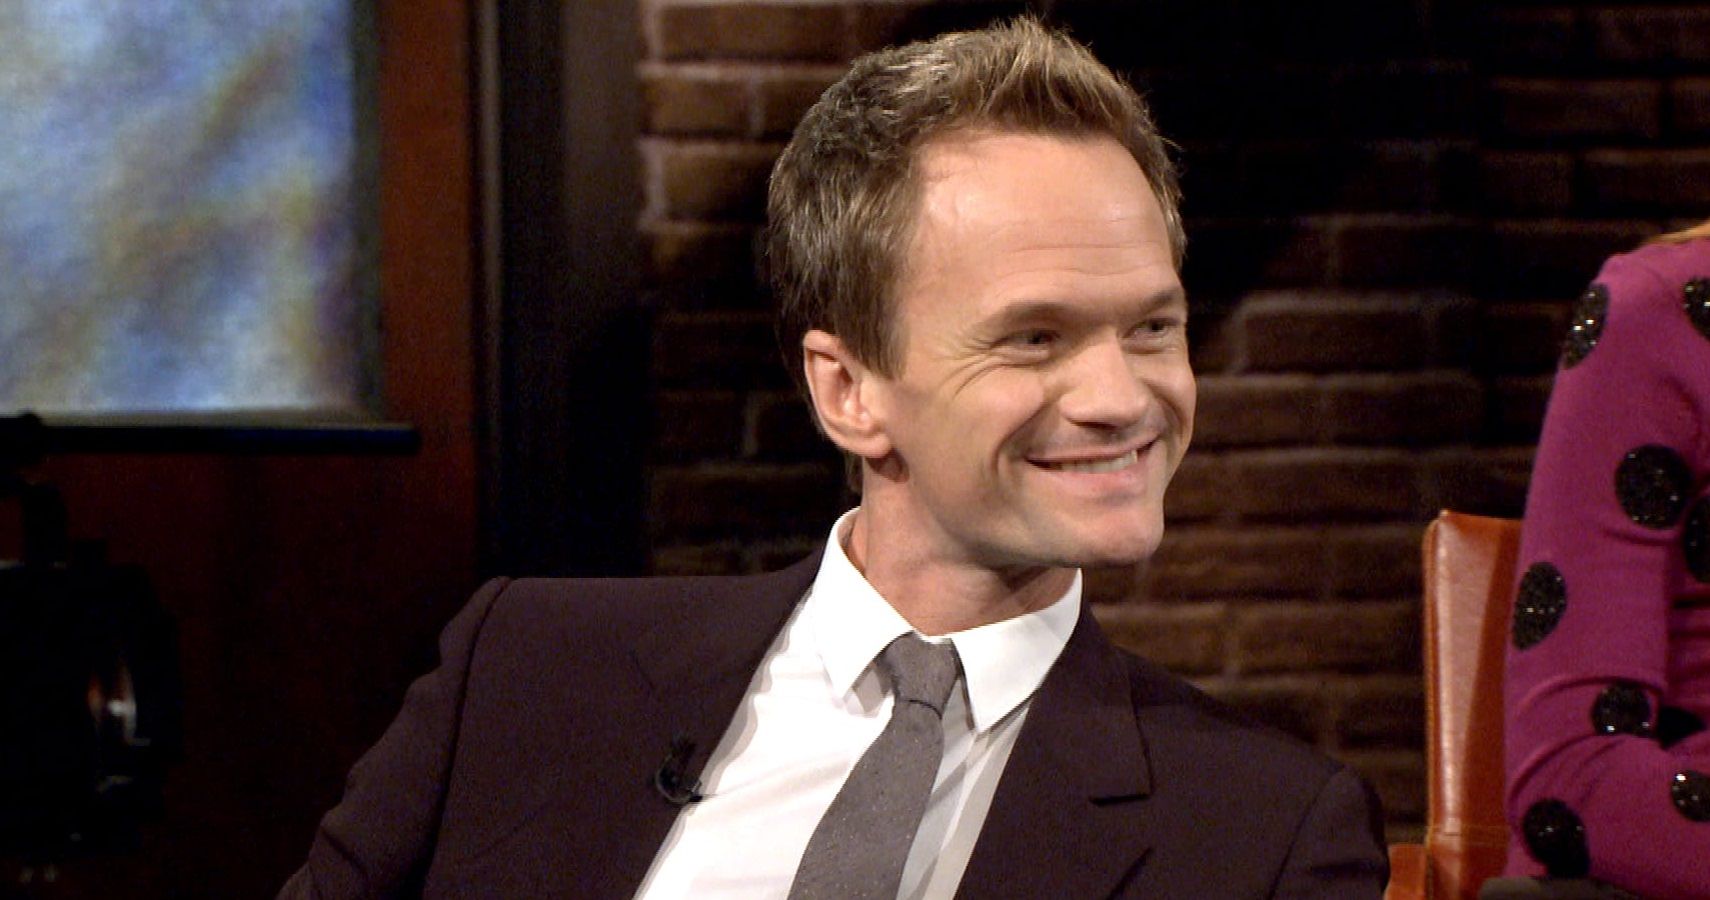 Barney smiling in How I Met Your Mother.